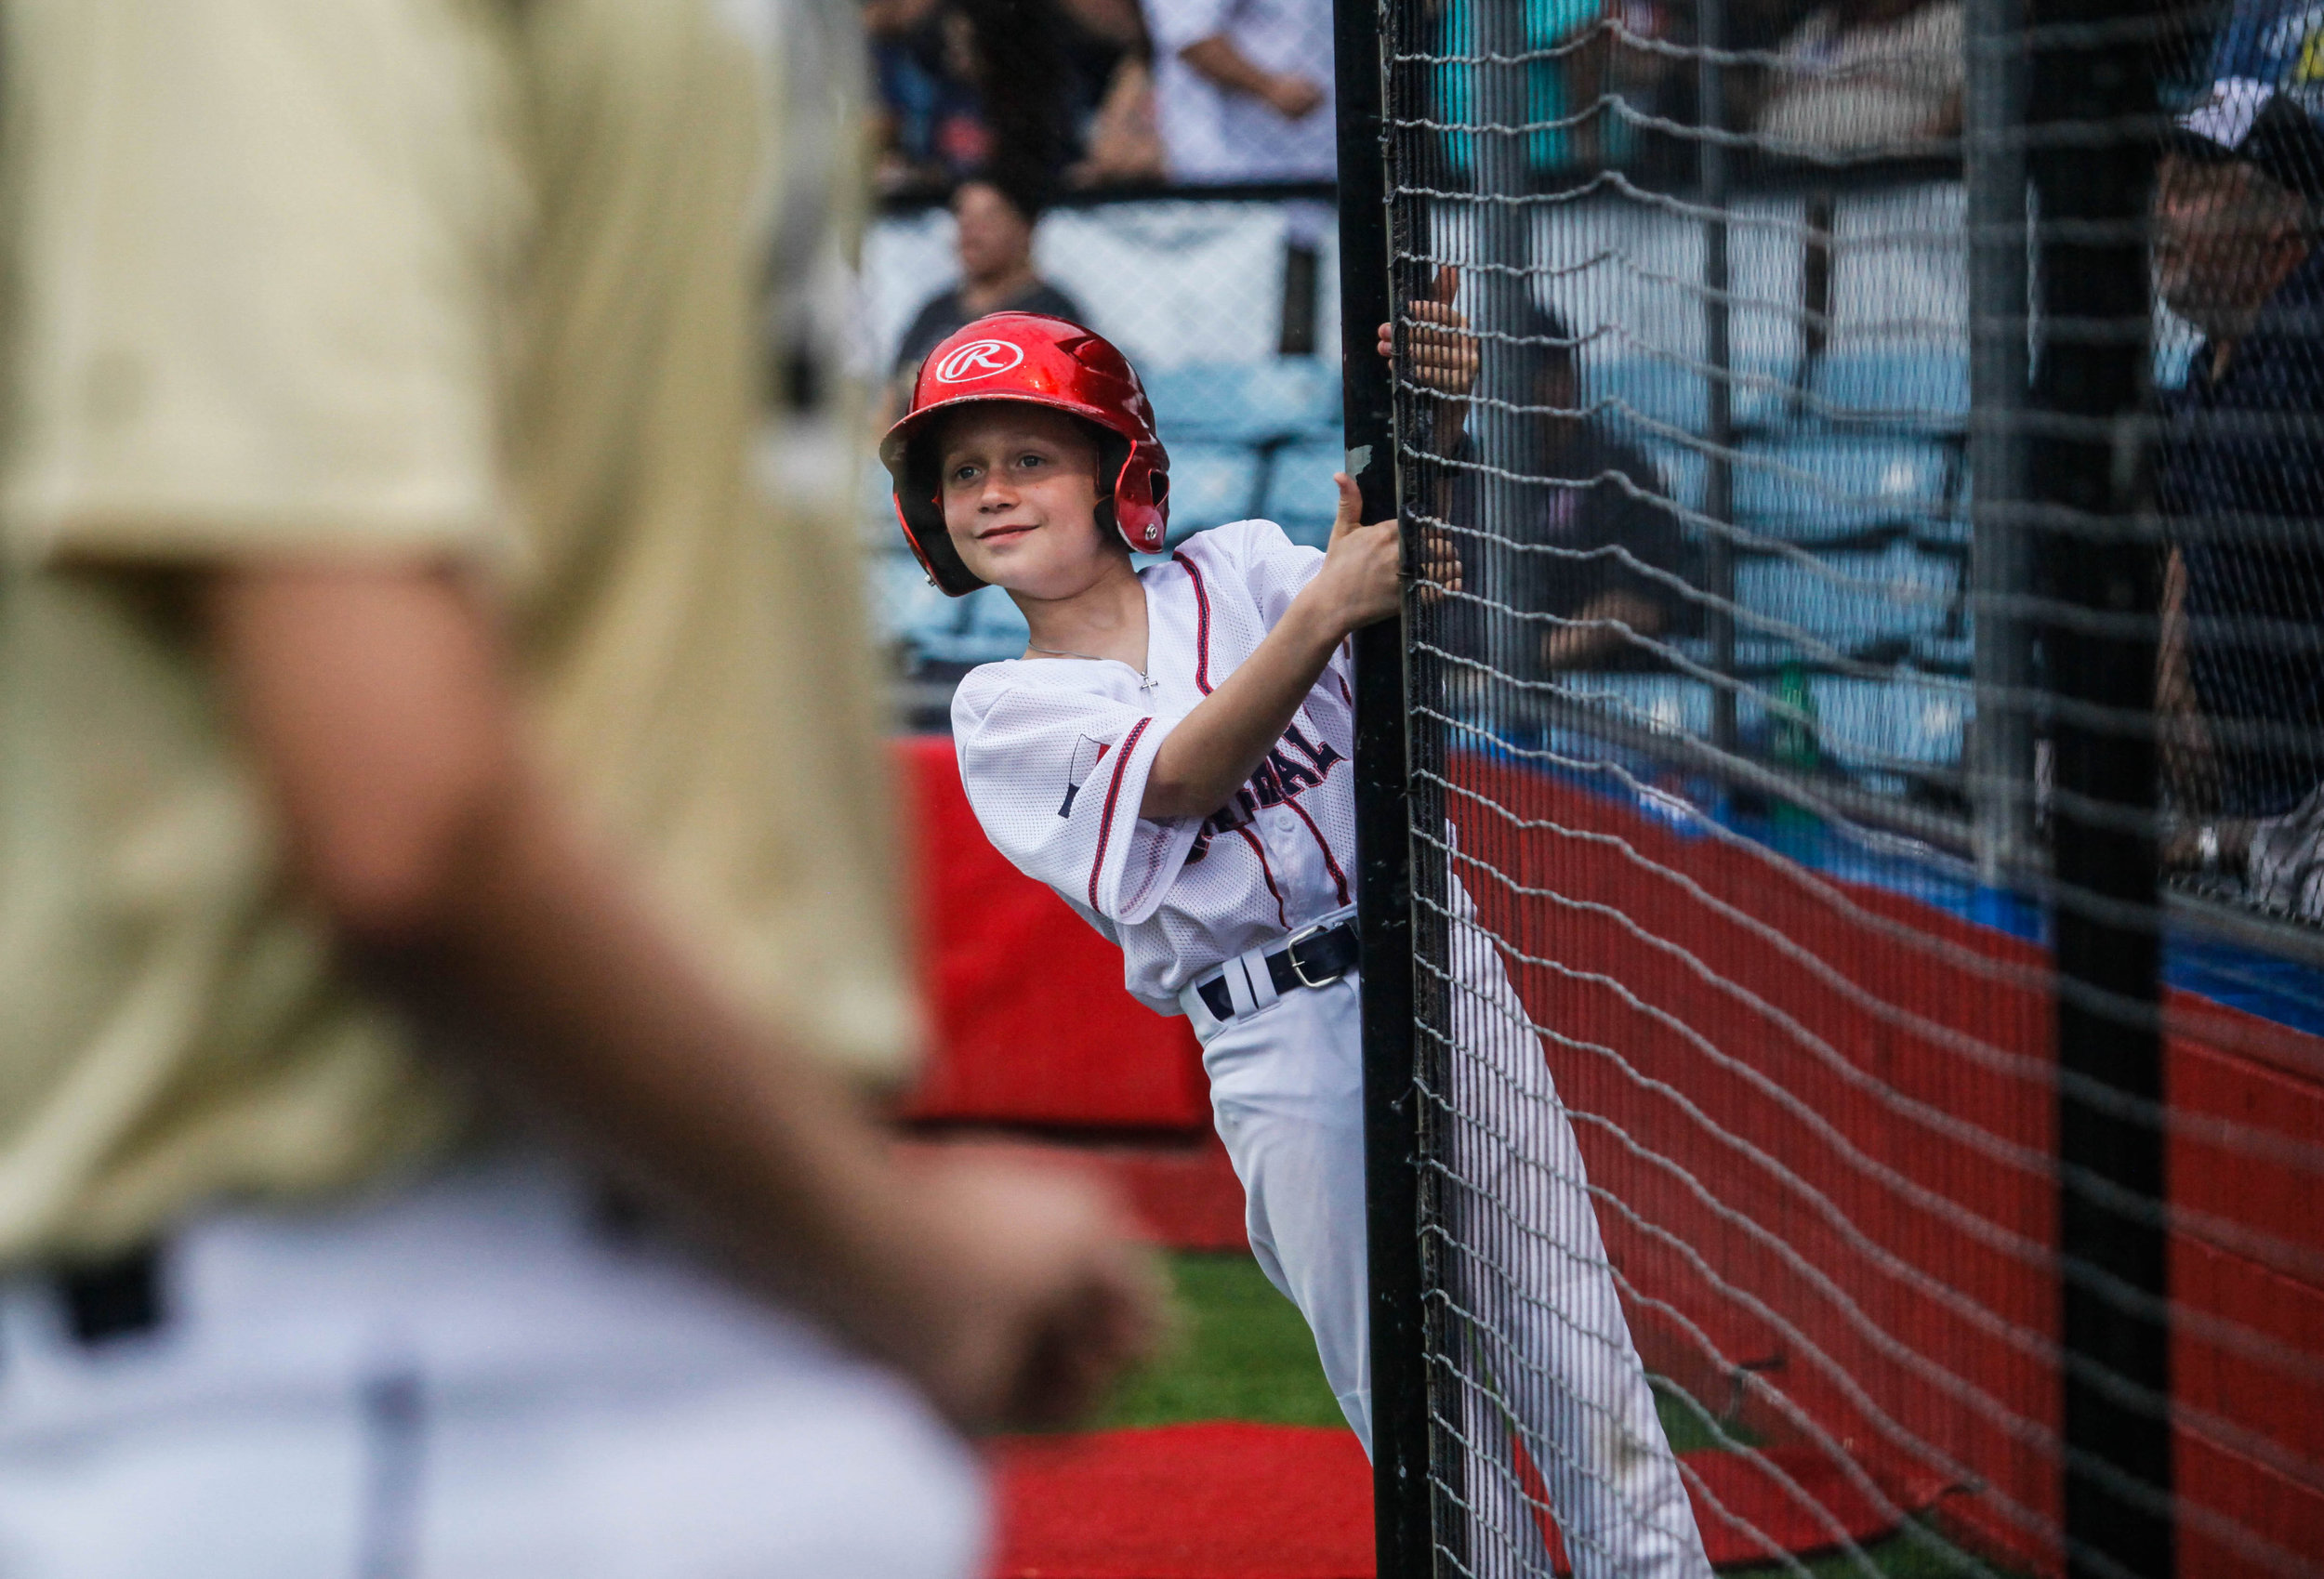  A bat boy watches from the dugout during Saturday’s Victoria Generals vs. Brazos Valley Bombers game at Riverside Stadium in Victoria, Texas on July 14, 2018 